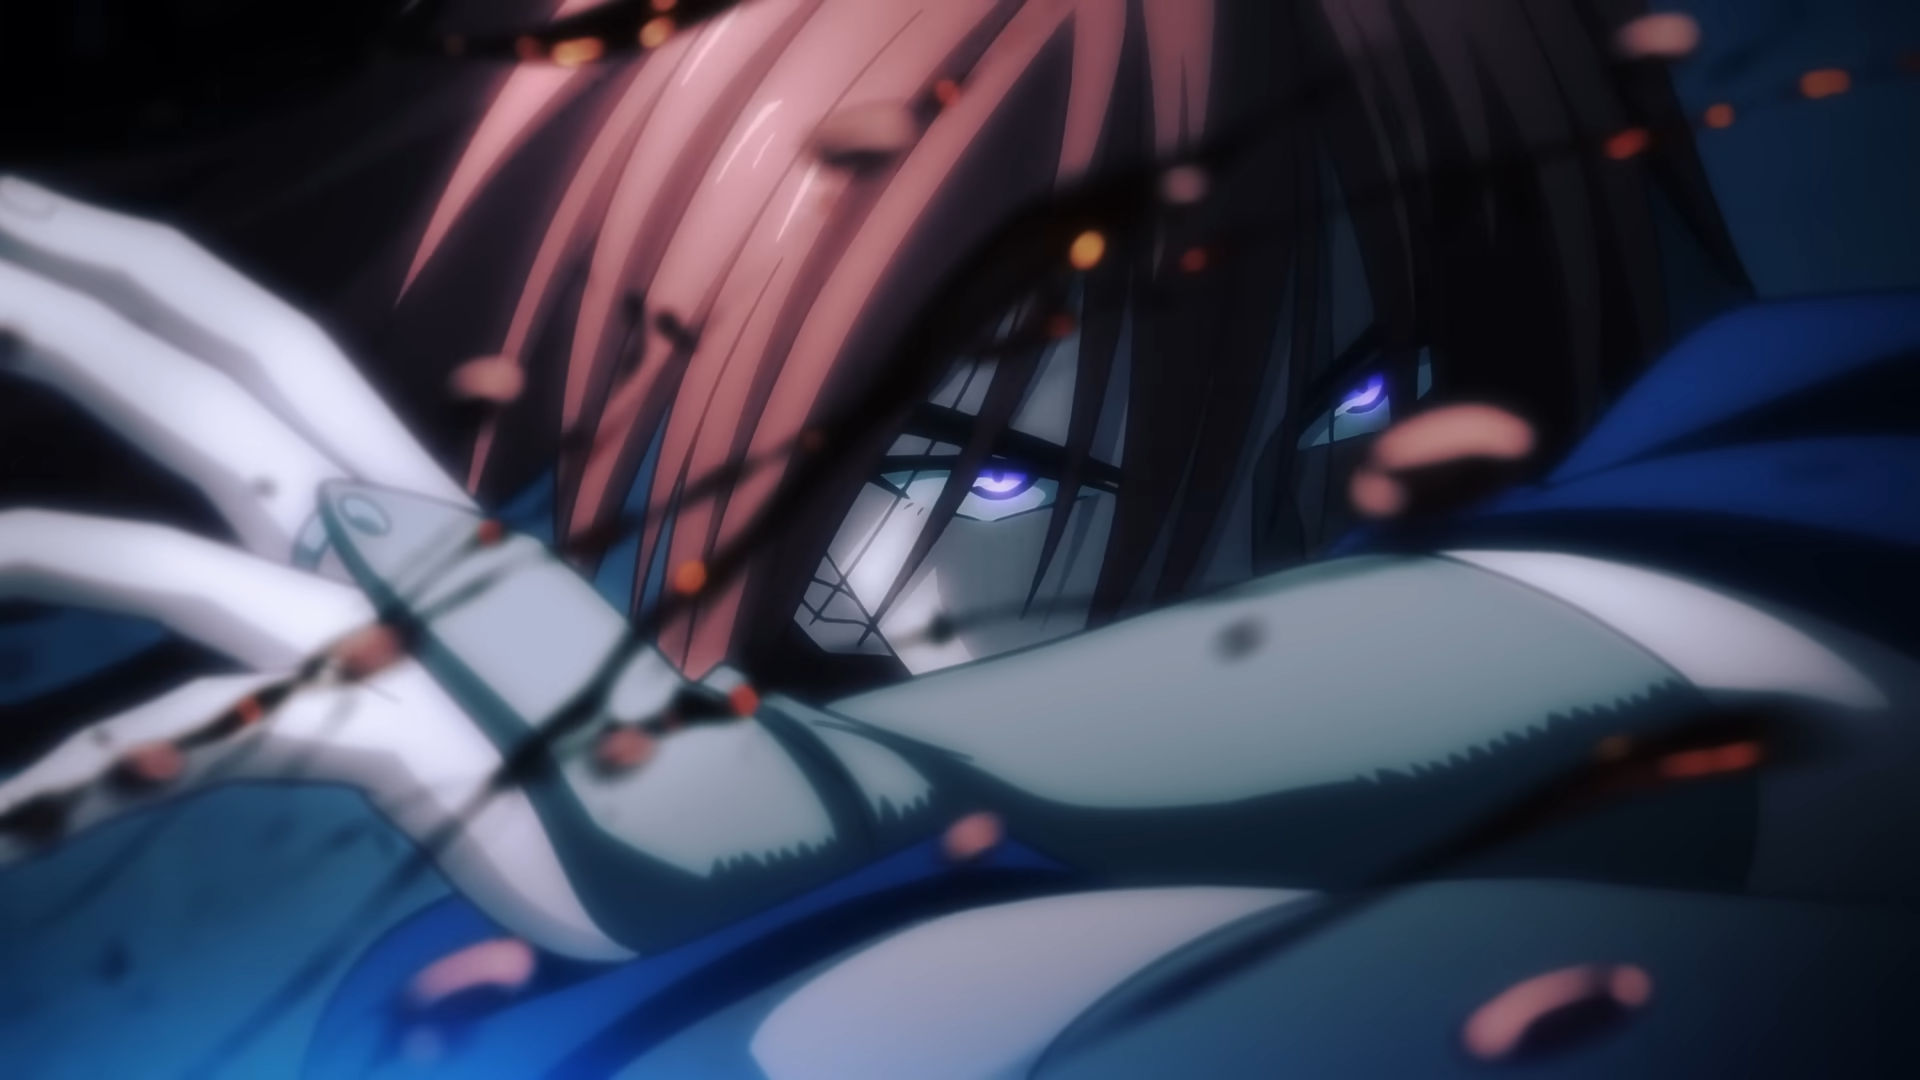 Rurouni Kenshin Reveals 2nd Story Visual & New PV Trailer for 2nd Cour